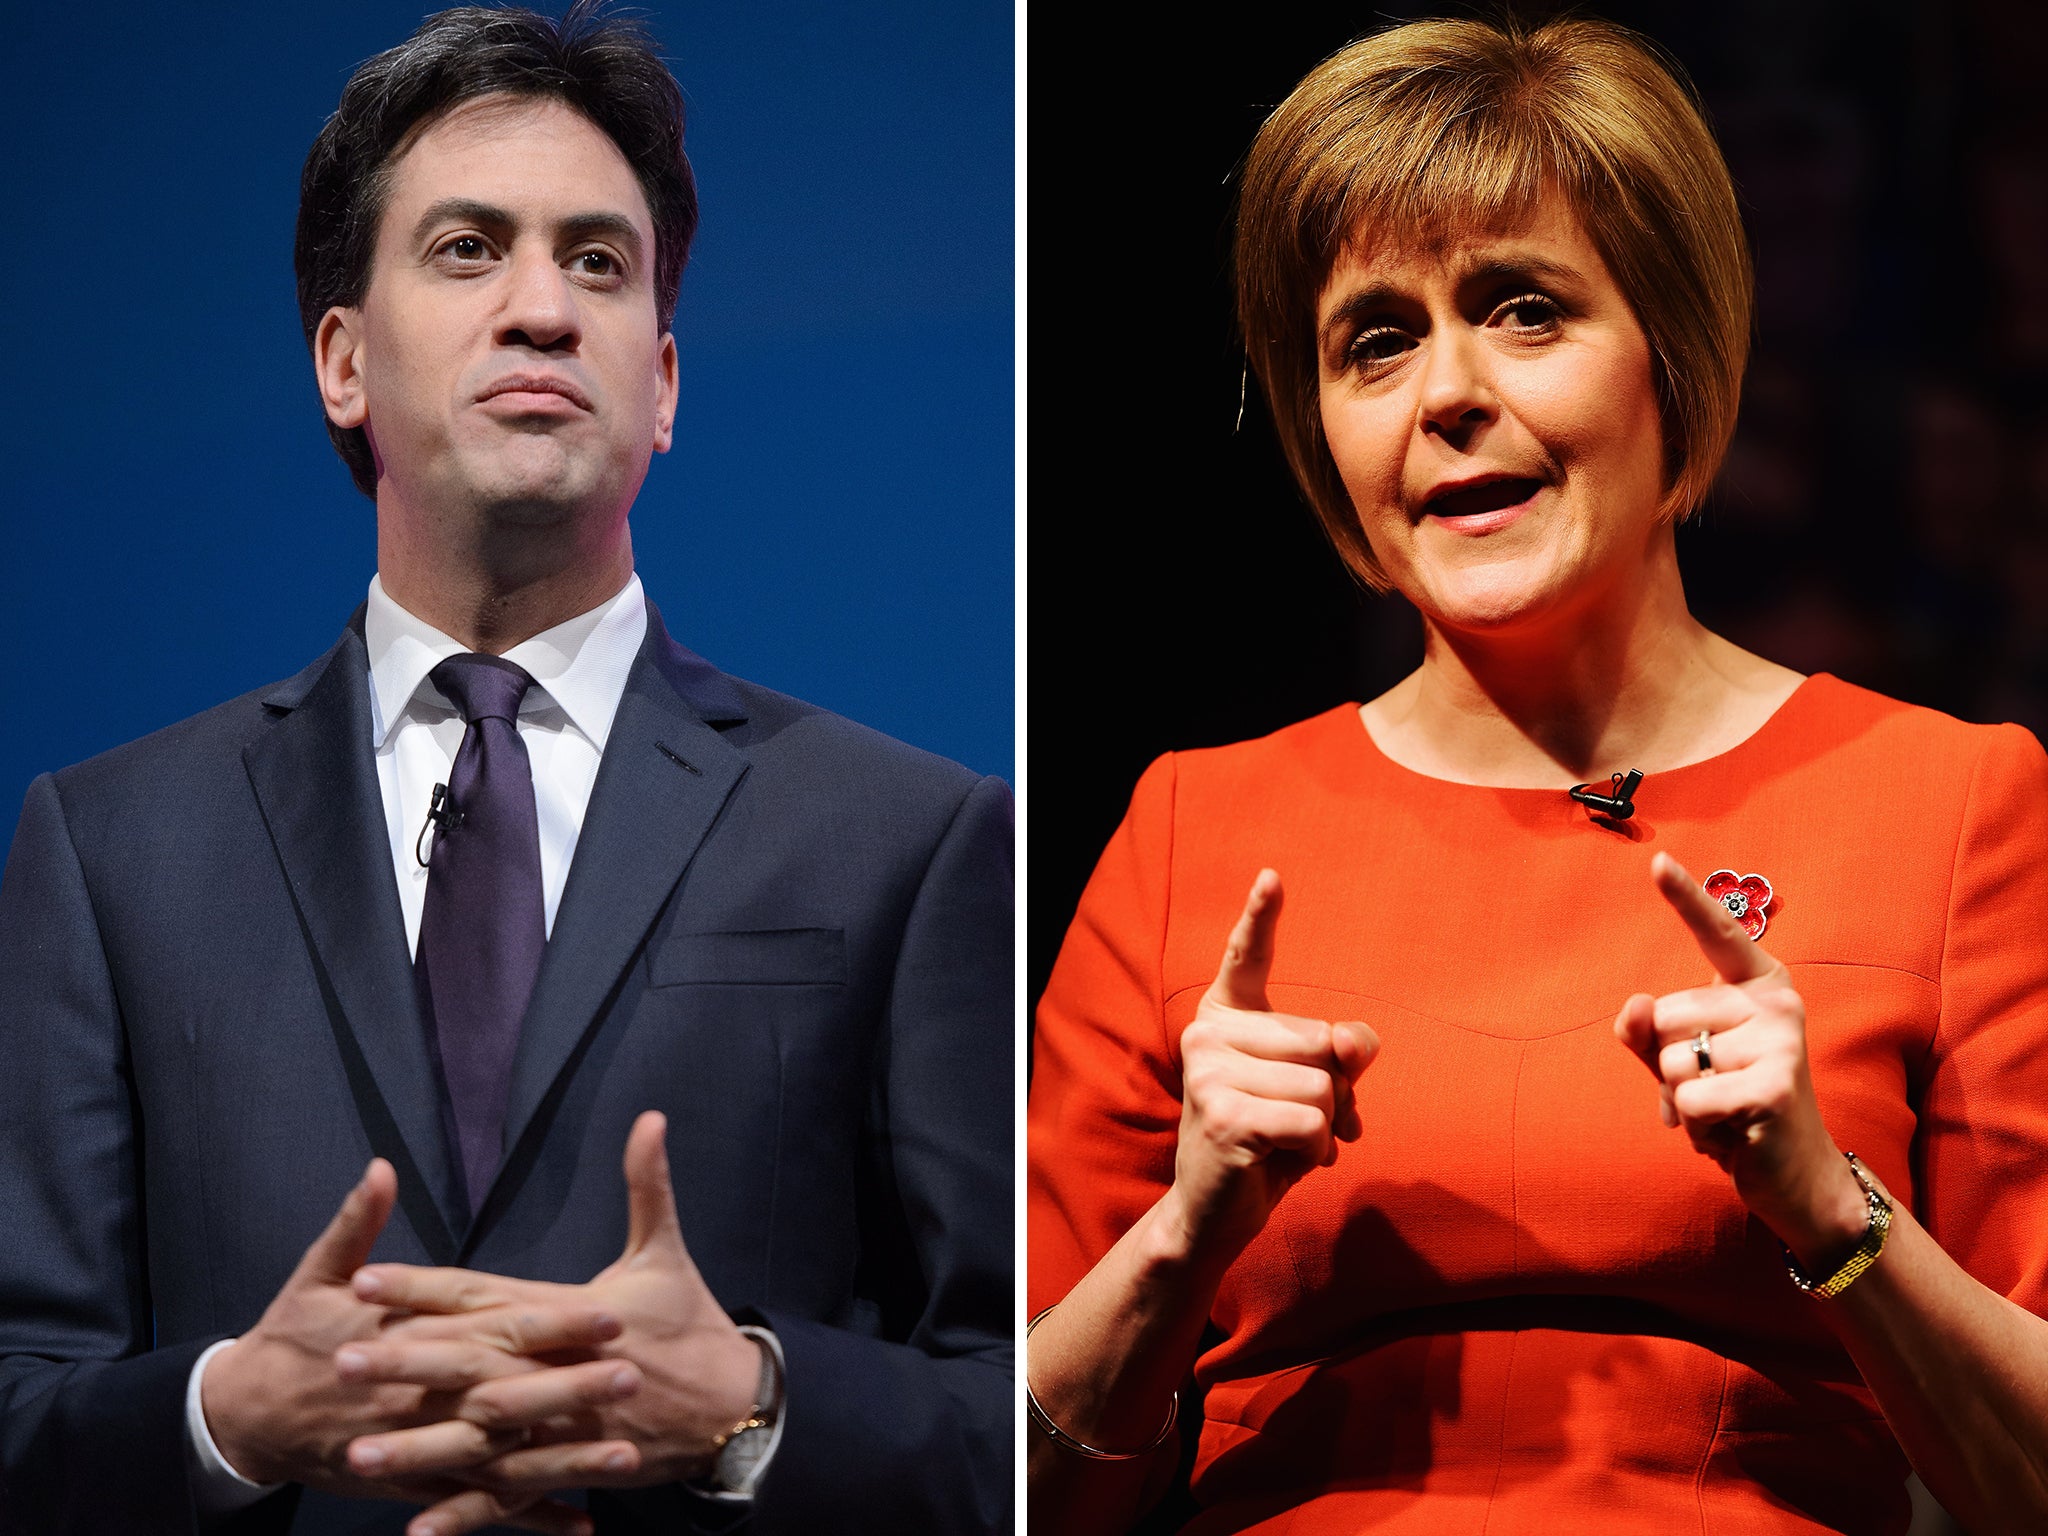 "Nicola Sturgeon’s interests are not the interests of the UK, nor the interests of my country. If Ed Miliband aspires to be a statesman he should realise that a government formed with such a partner is a poisoned chalice."